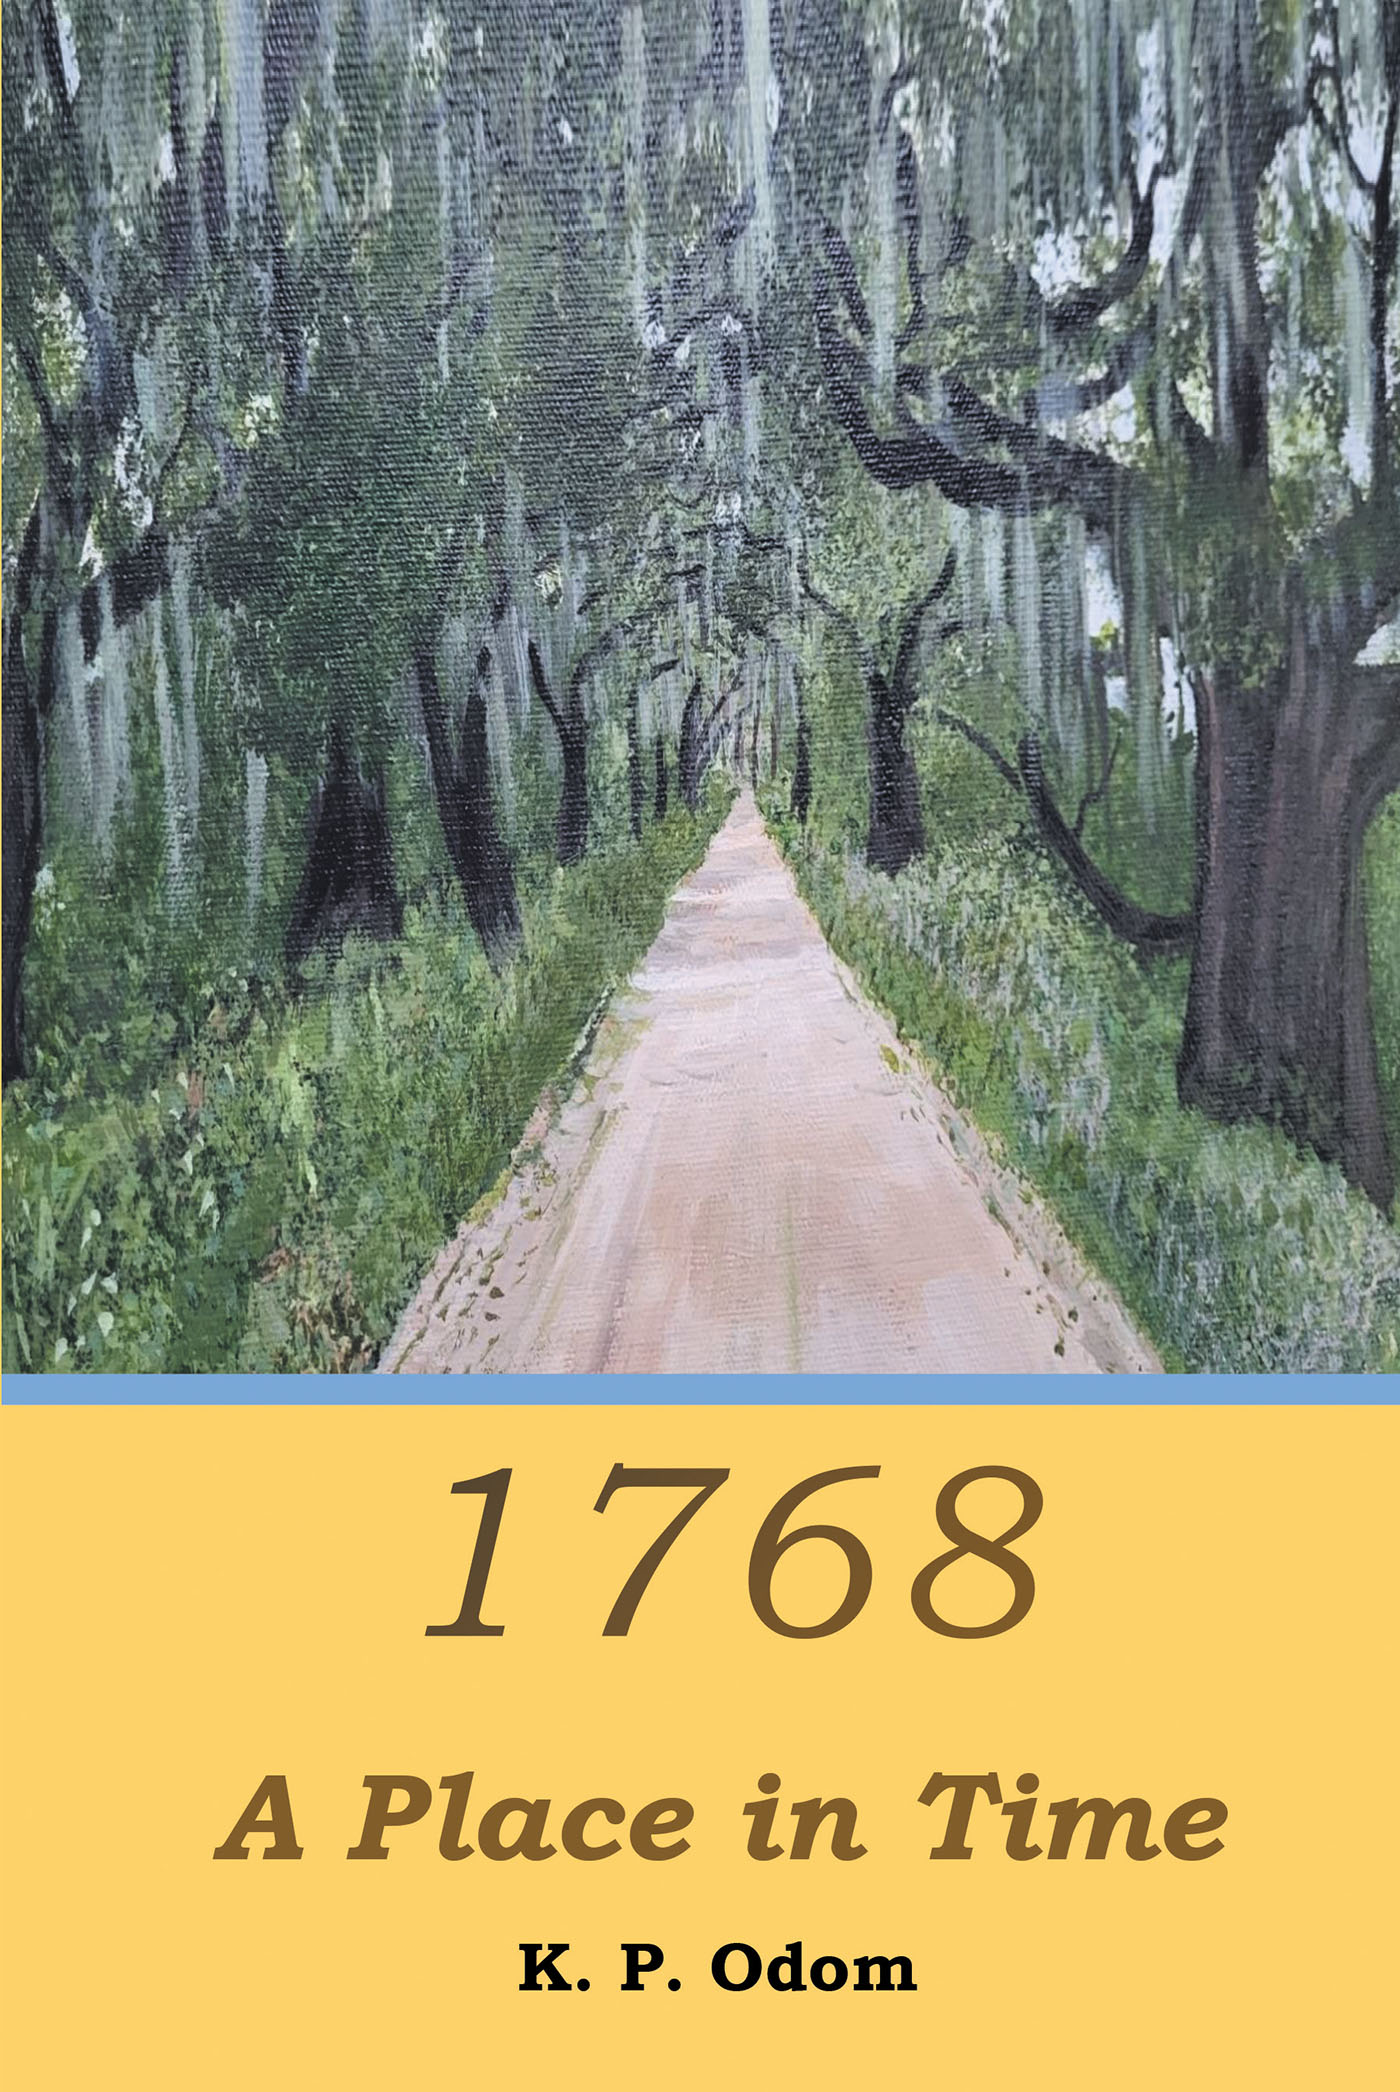 K.P. Odom’s New Book, "1768: A Place in Time," is the Gripping Story of Two Cousins on an Archeological Dig Who Uncover a New Artifact That Transports Them to the Past